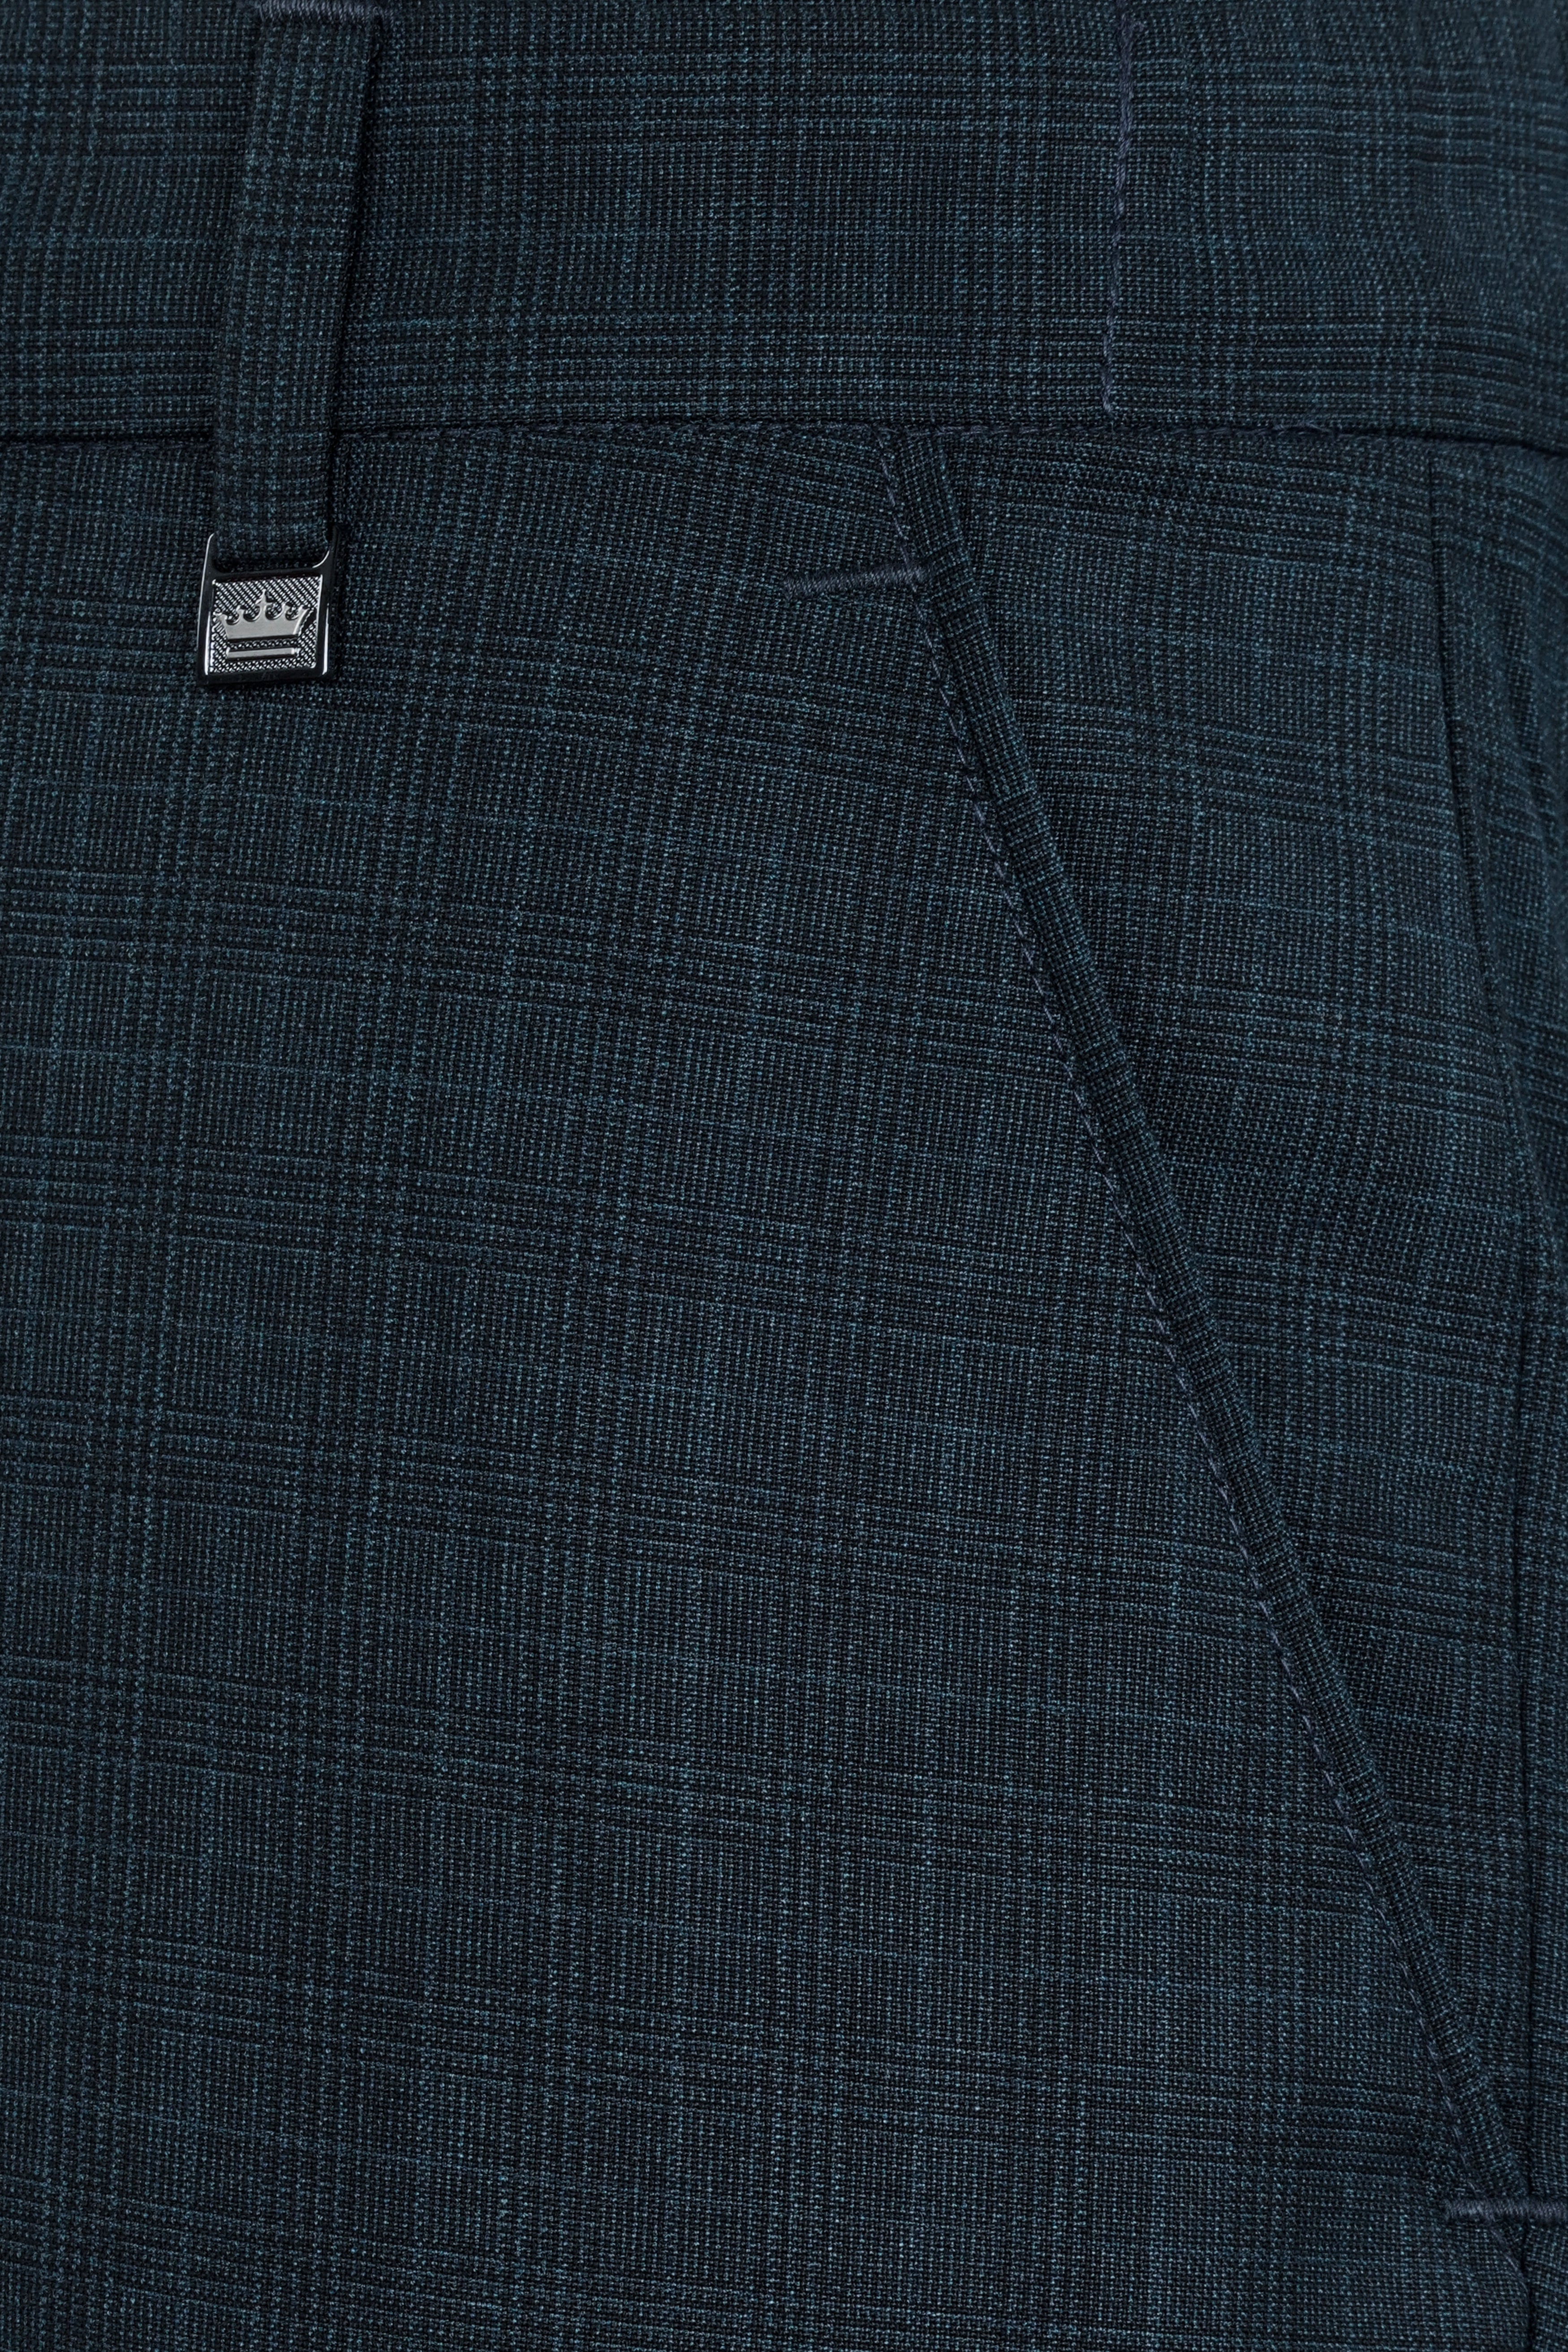 Charade Blue Wool Rich Single Breasted Suit ST2911-SB-36, ST2911-SB-38, ST2911-SB-40, ST2911-SB-42, ST2911-SB-44, ST2911-SB-46, ST2911-SB-48, ST2911-SB-50, ST2911-SB-52, ST2911-SB-54, ST2911-SB-56, ST2911-SB-58, ST2911-SB-60